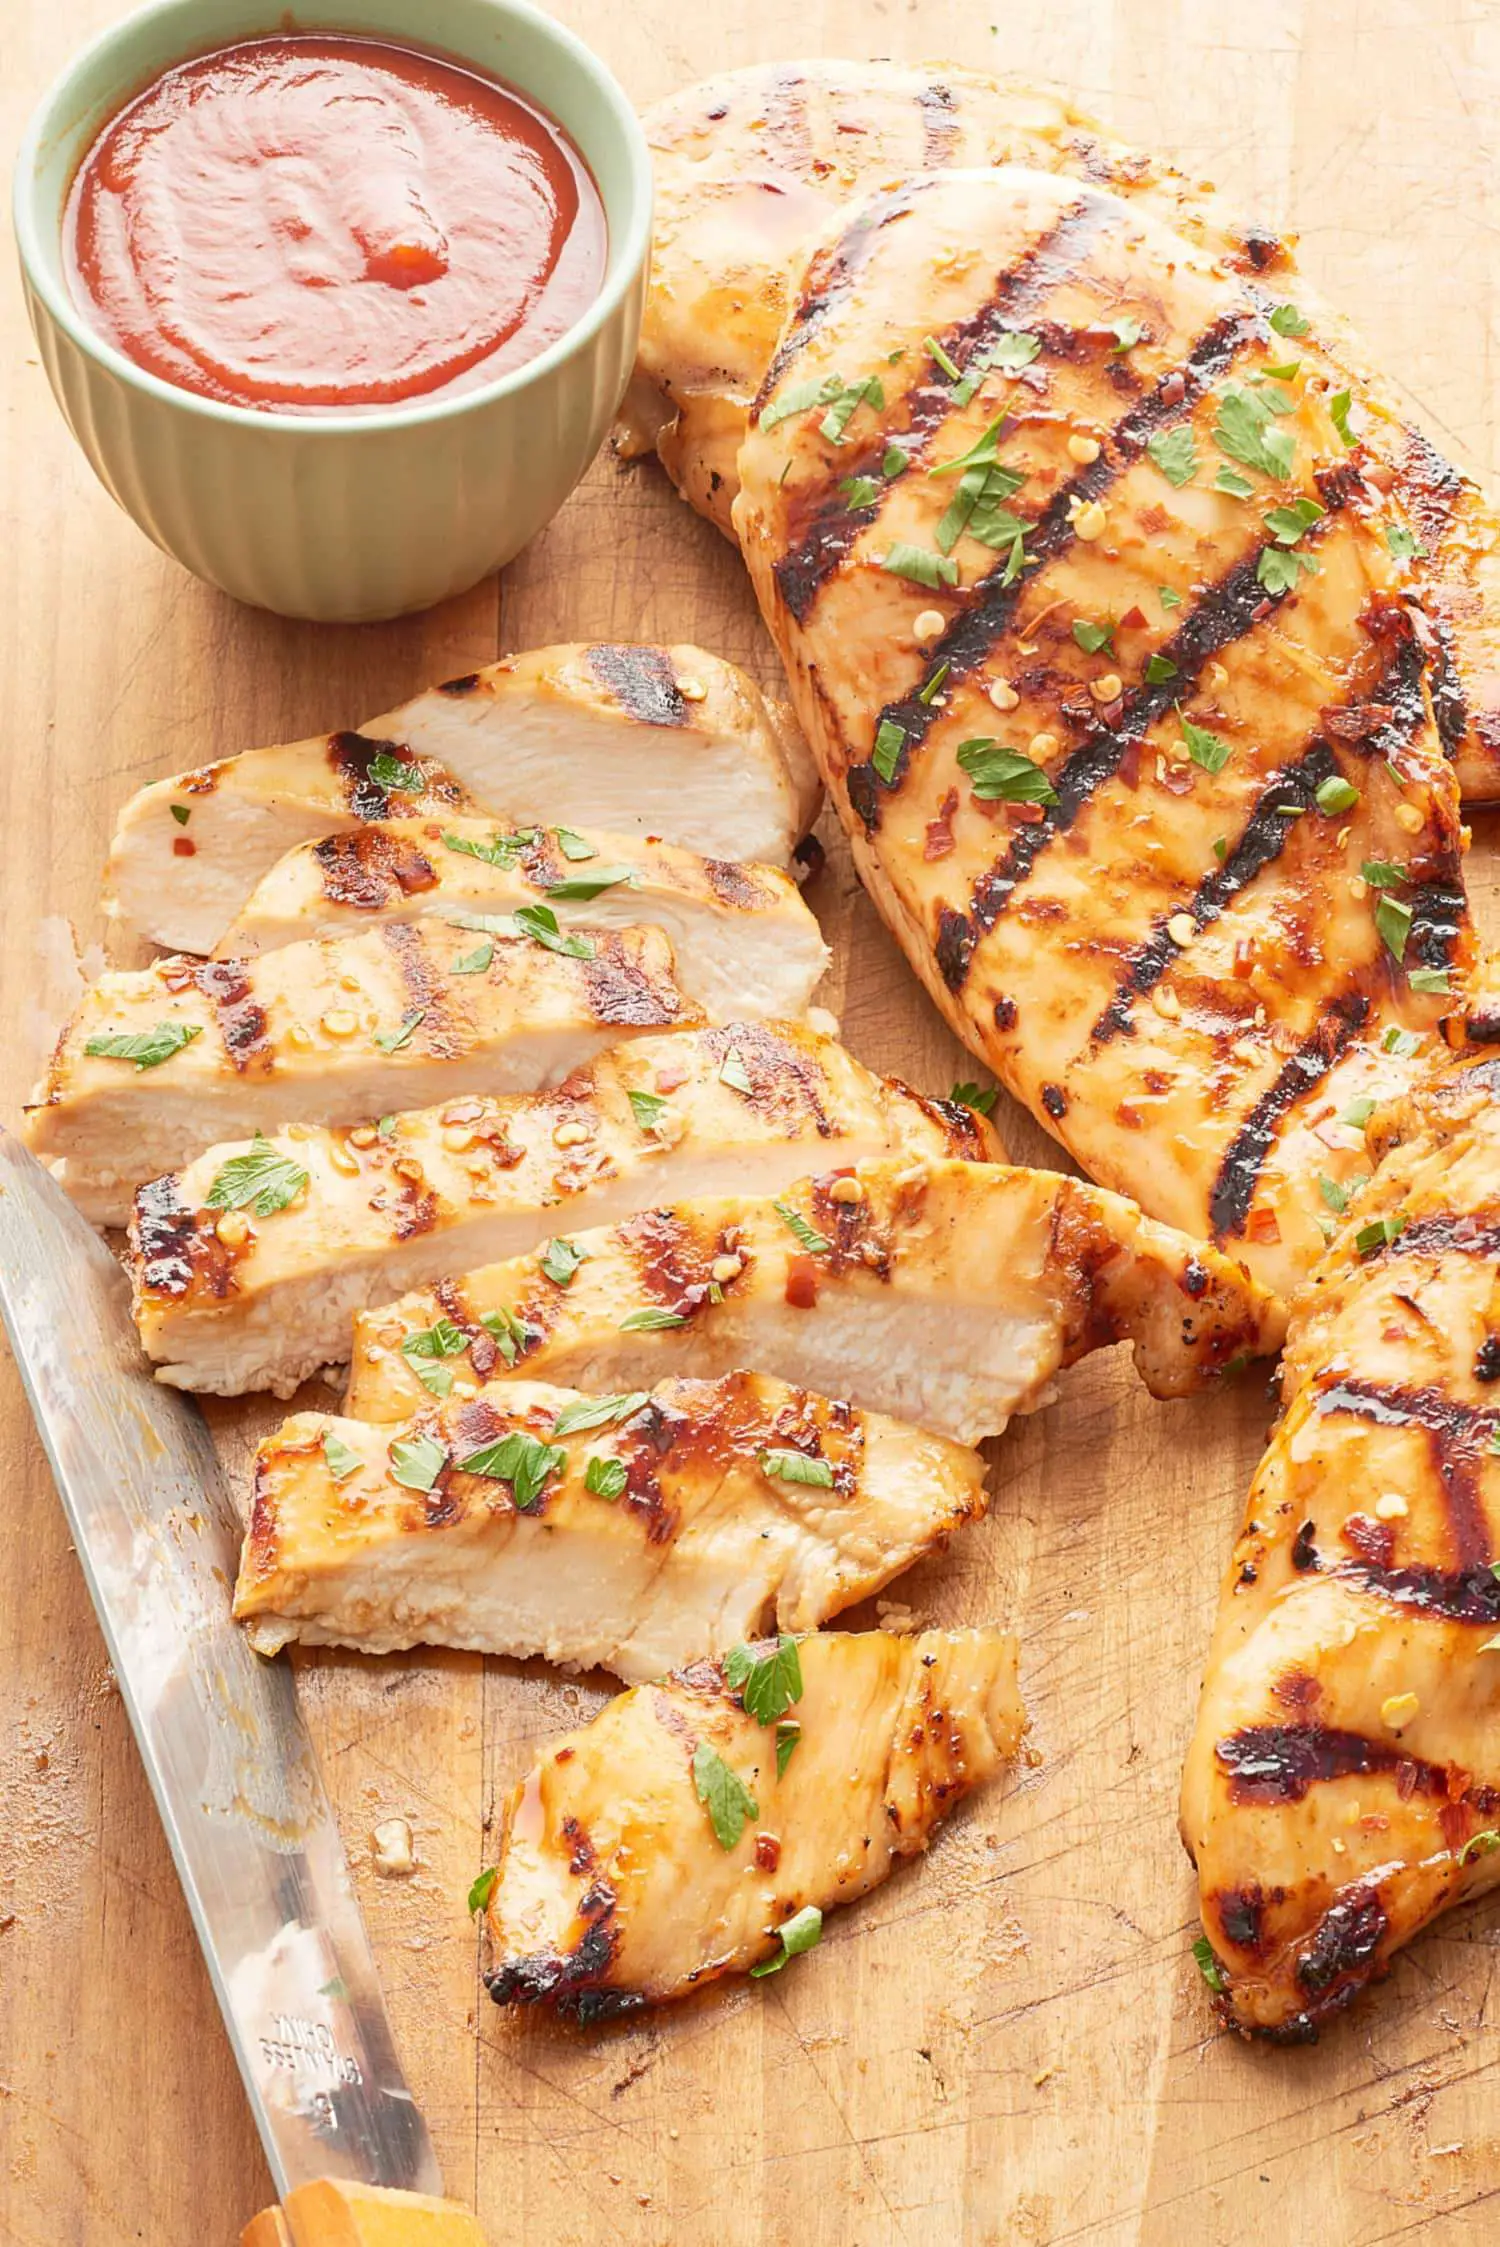 How To Make Juicy, Flavorful Grilled Chicken Breast